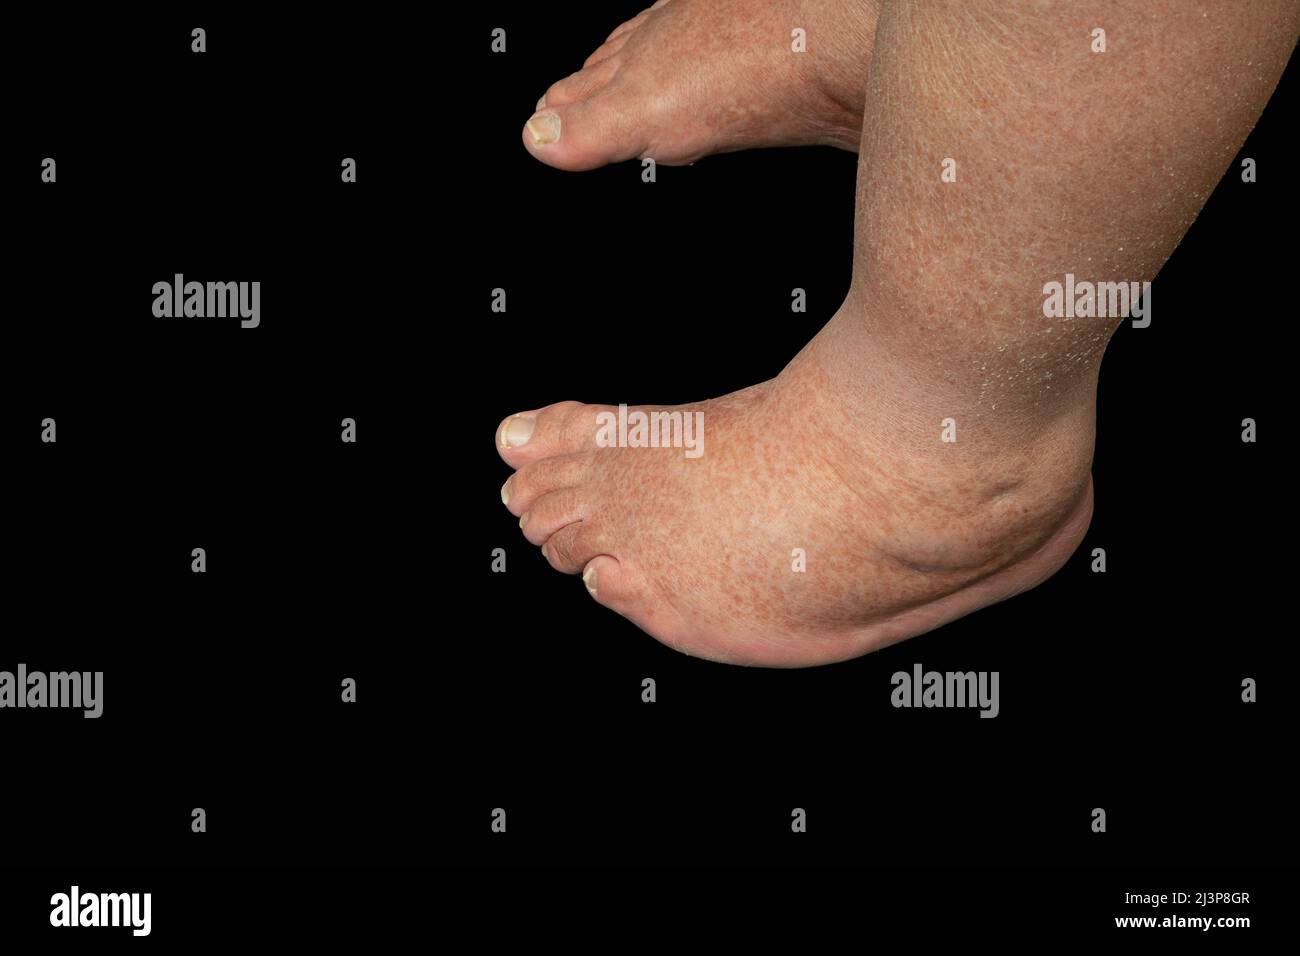 A man with clubfoot (talipes) standing on a black background. Both feet are turned inward because of the condition Stock Photo